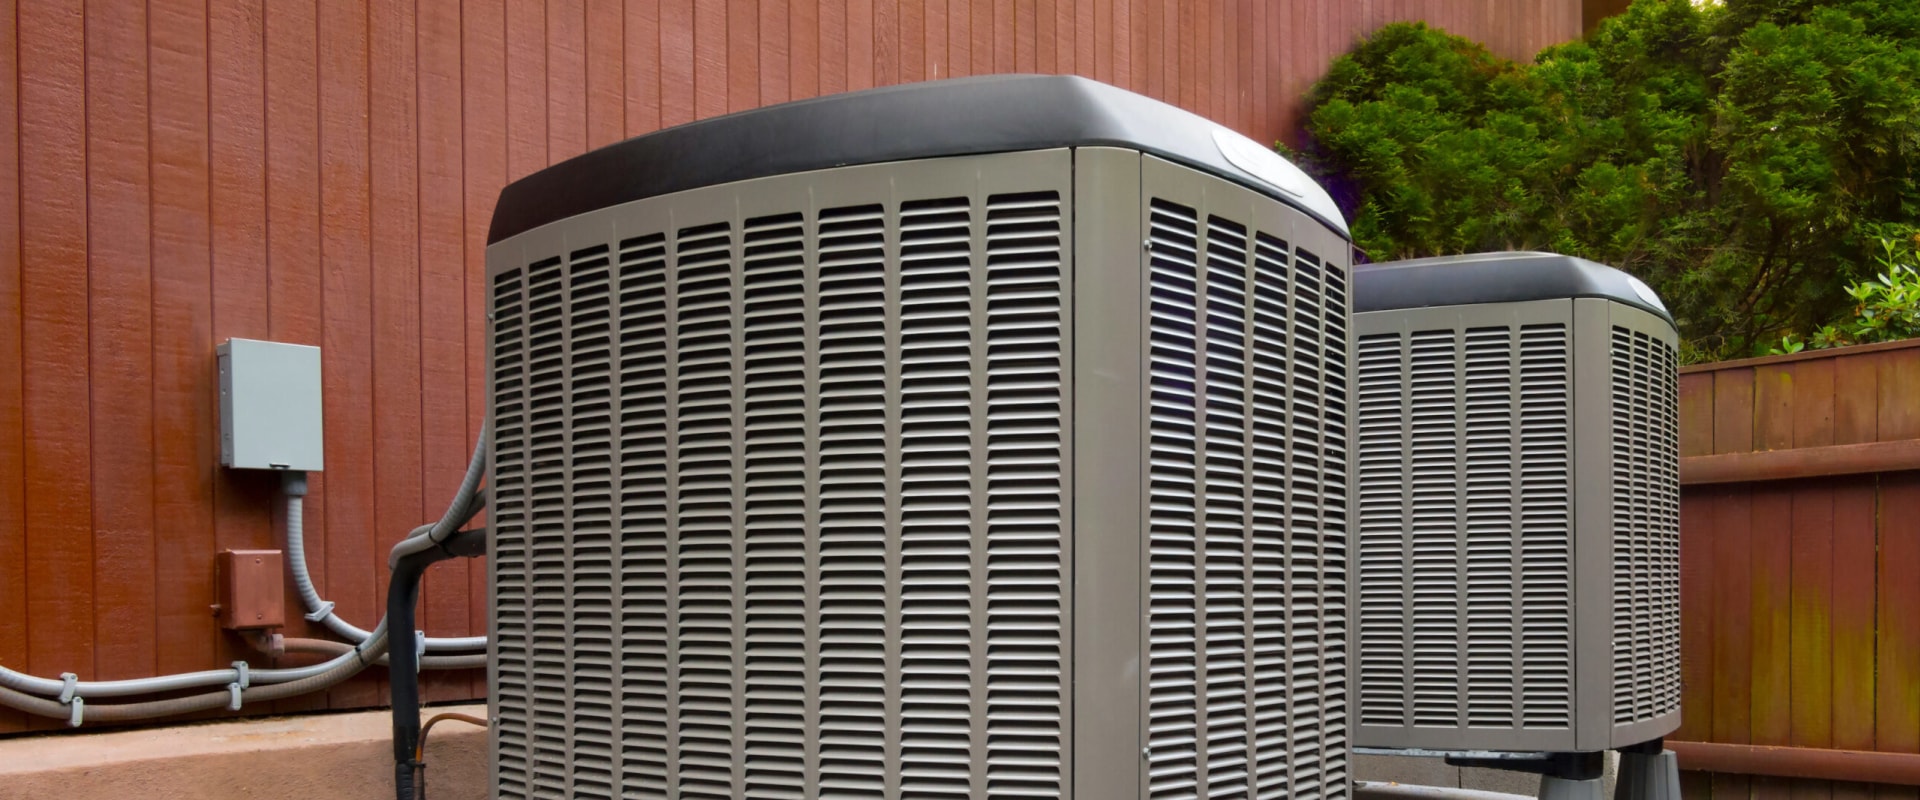 The Top Players in the Air Conditioning Industry